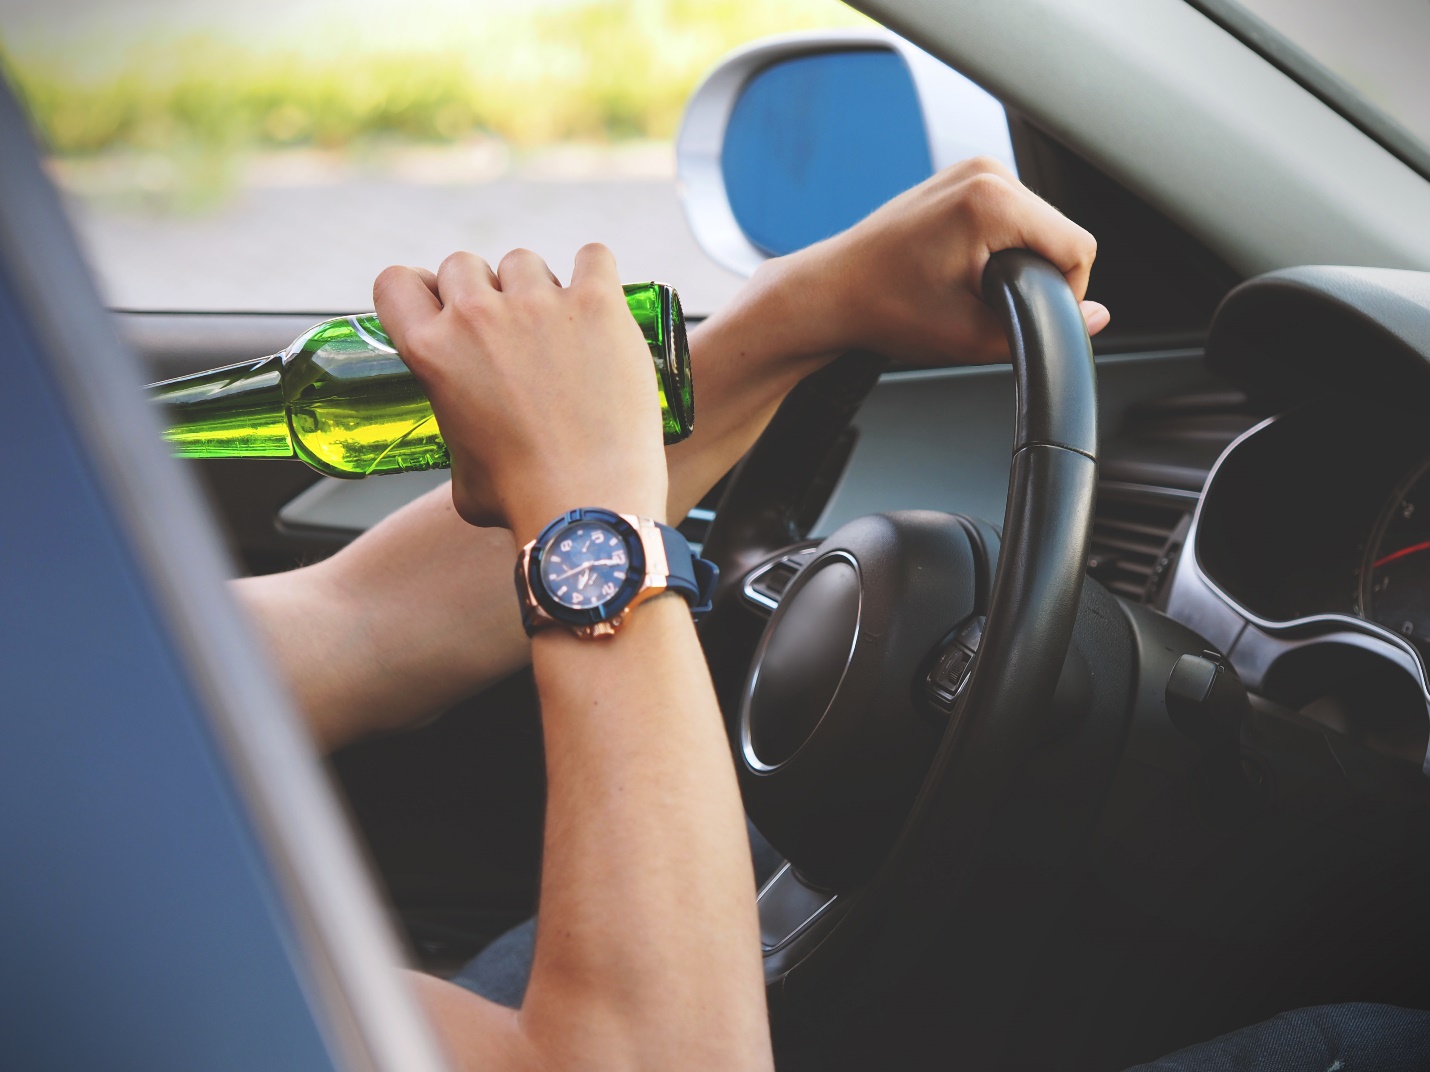 Brief Insight About Impaired Driving & Related Penalties